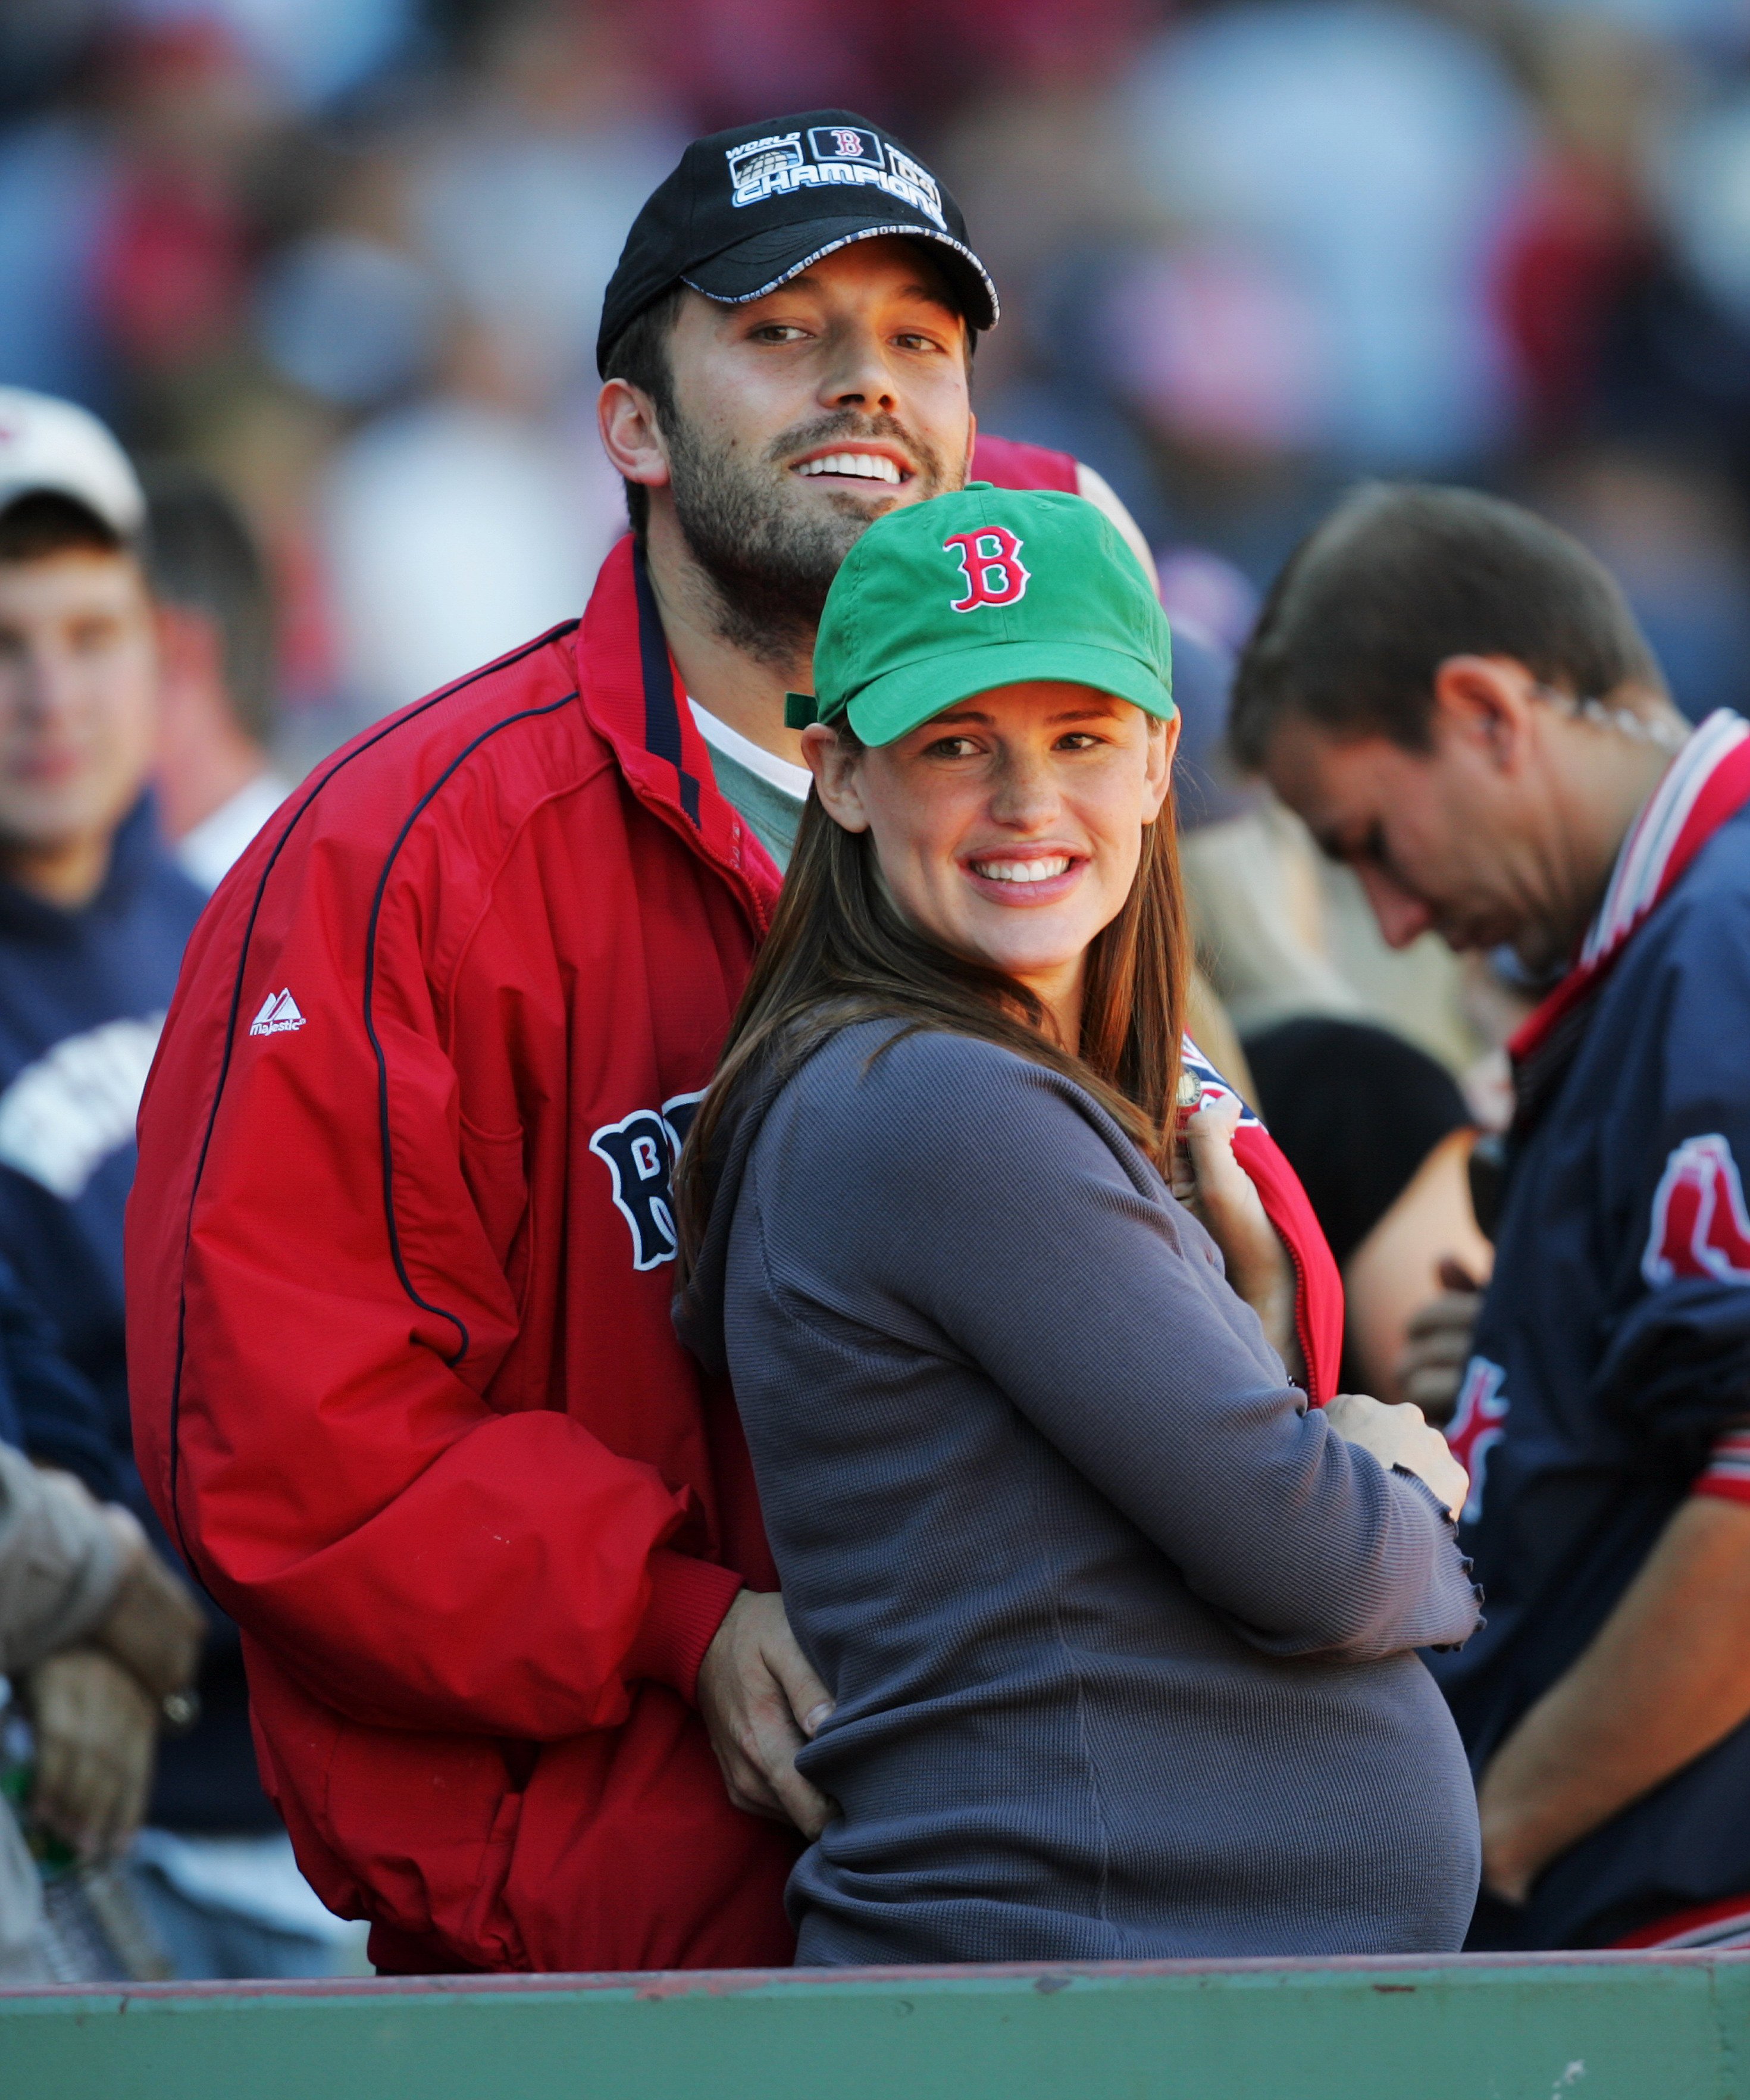 Ben Affleck and wife Jennifer Garner, who's expecting their first child, are on hand to cheer on the Boston Red Sox during a game against the New York Yankees at Fenway Park. October 2005 | Source: Getty Images 